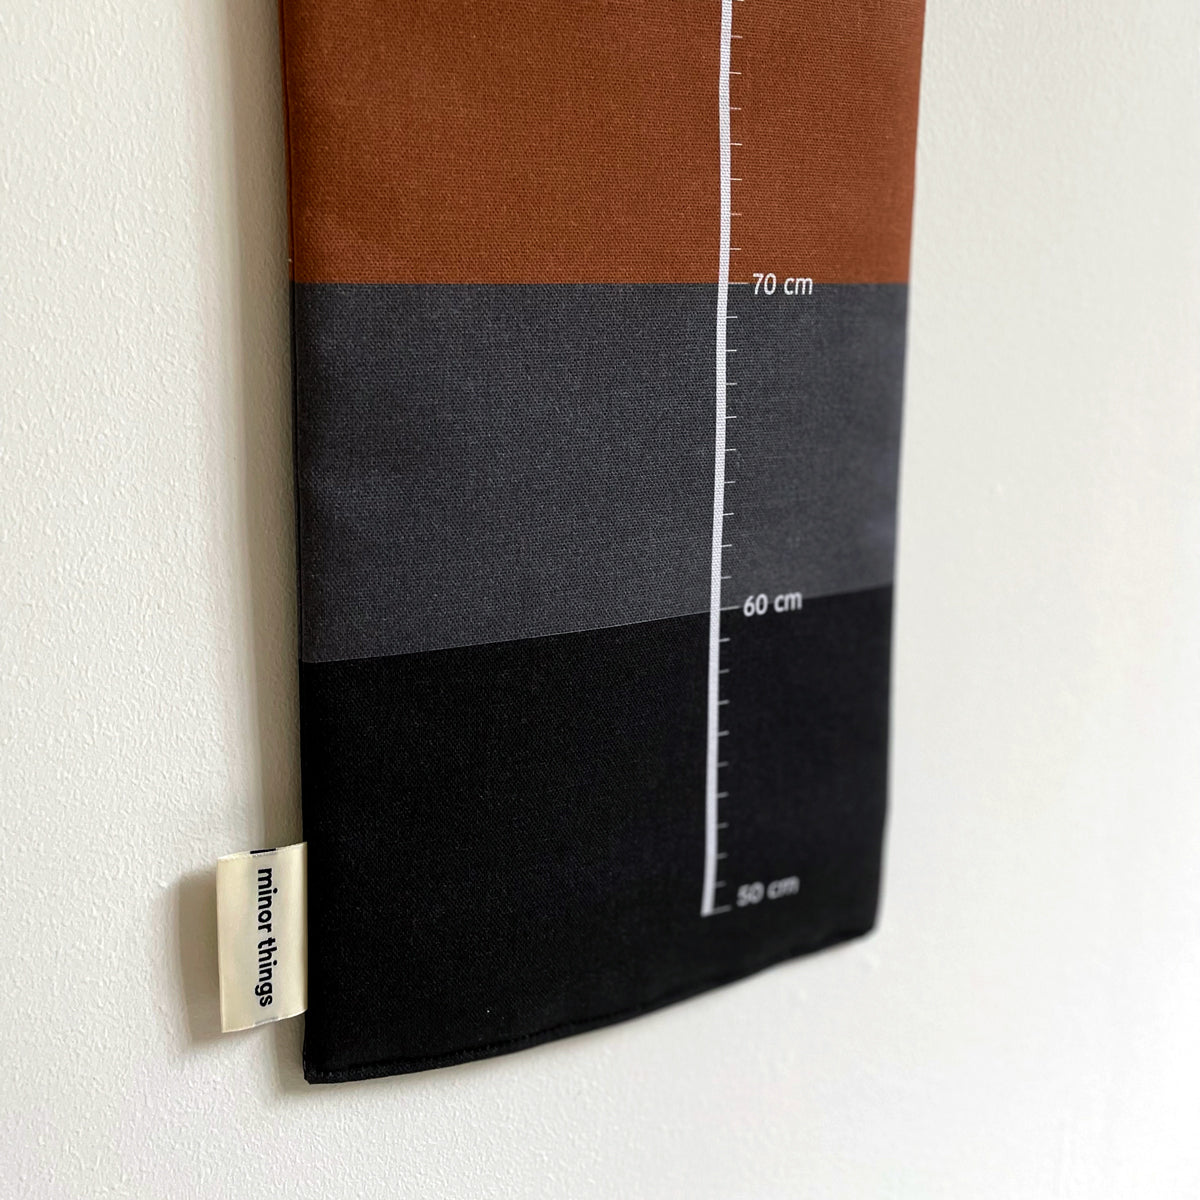 Minor Things Growth Chart colour scheme